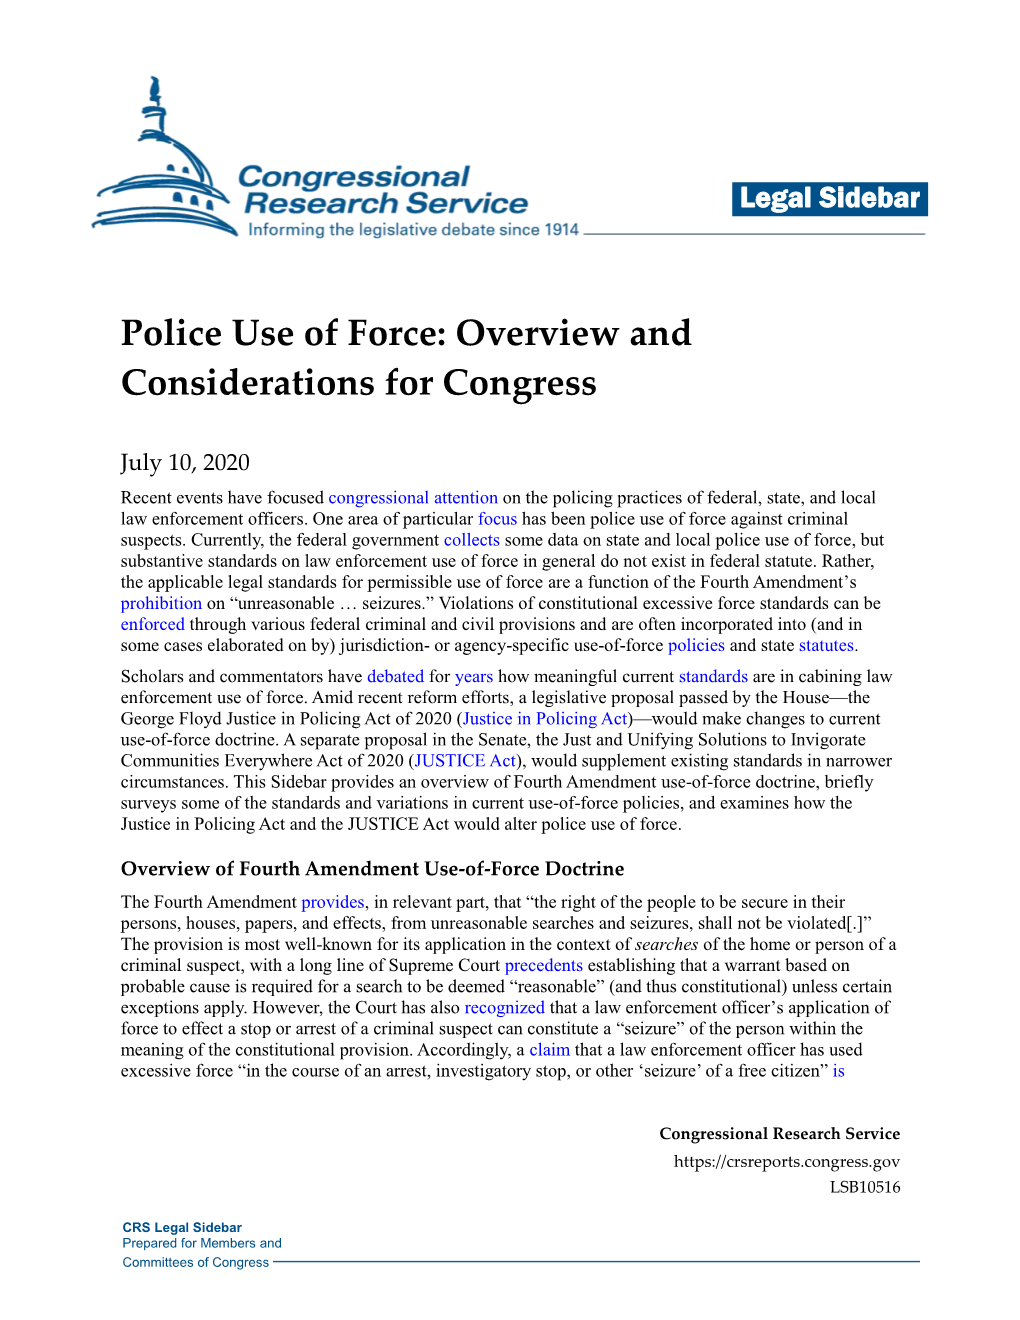 Police Use of Force: Overview and Considerations for Congress